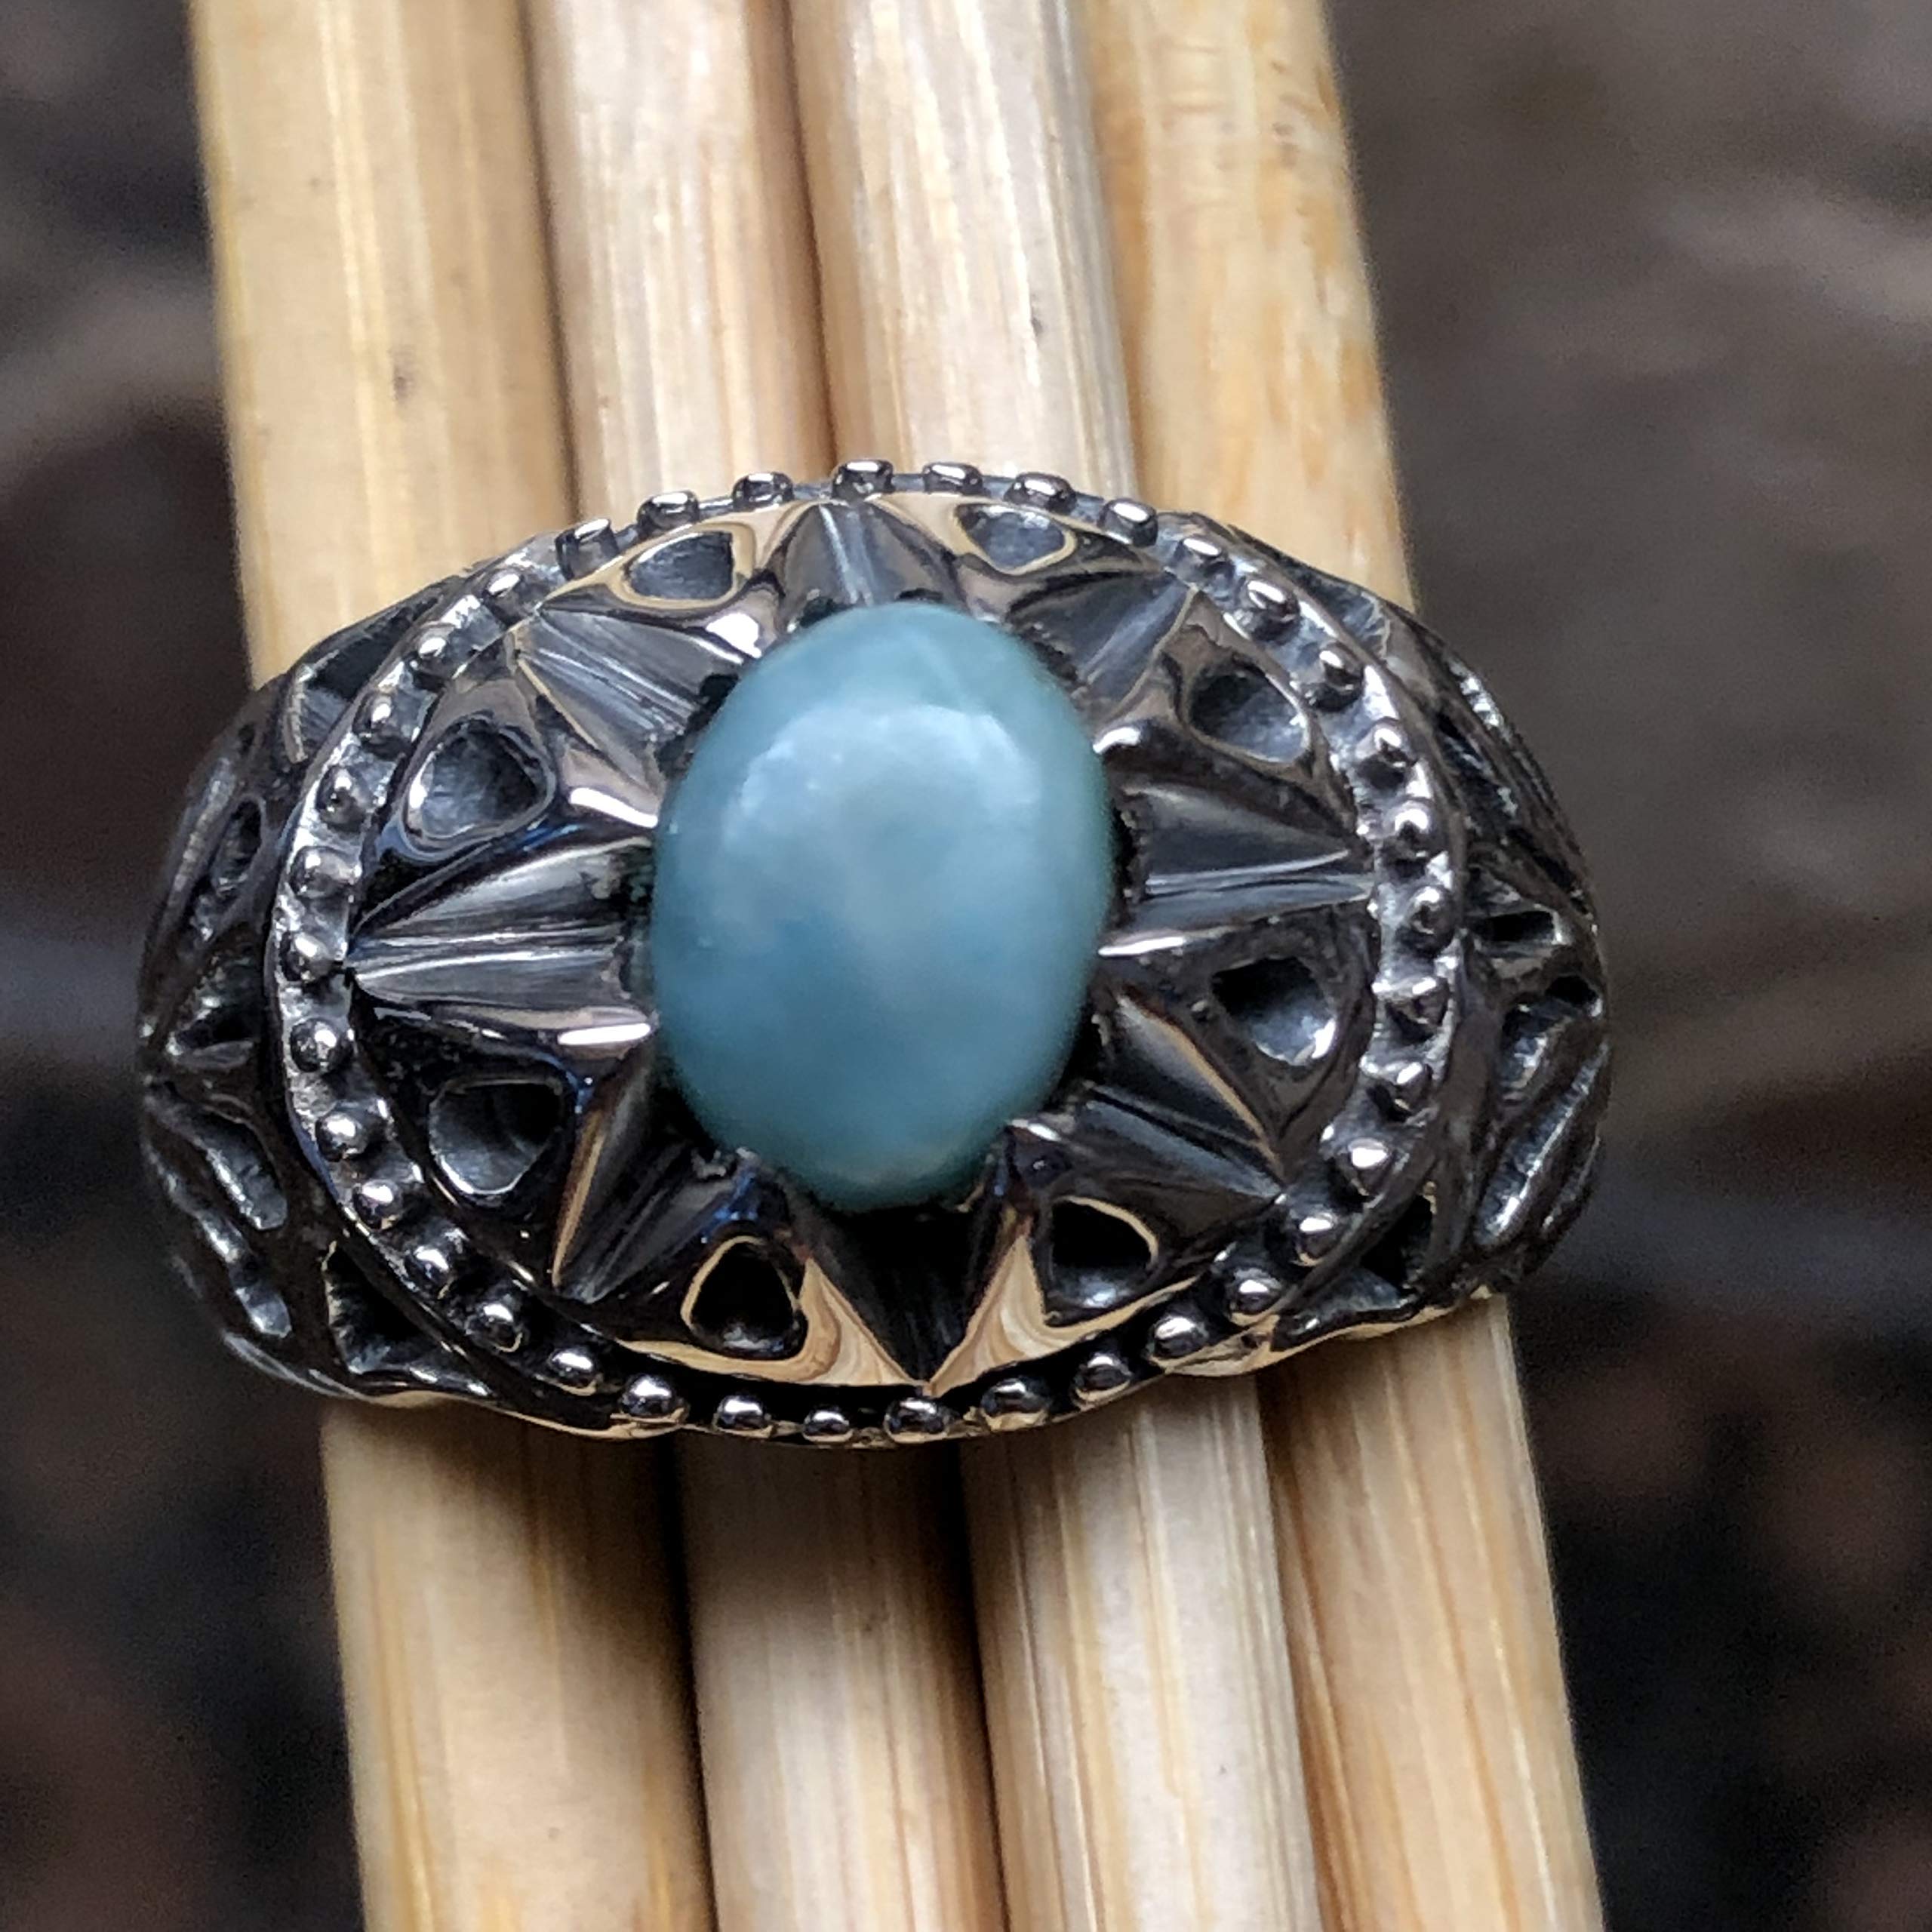 Natural Dominican Larimar 925 Solid Sterling Silver Men's Ring Size 8, 9, 10, 11, 12 - Natural Rocks by Kala